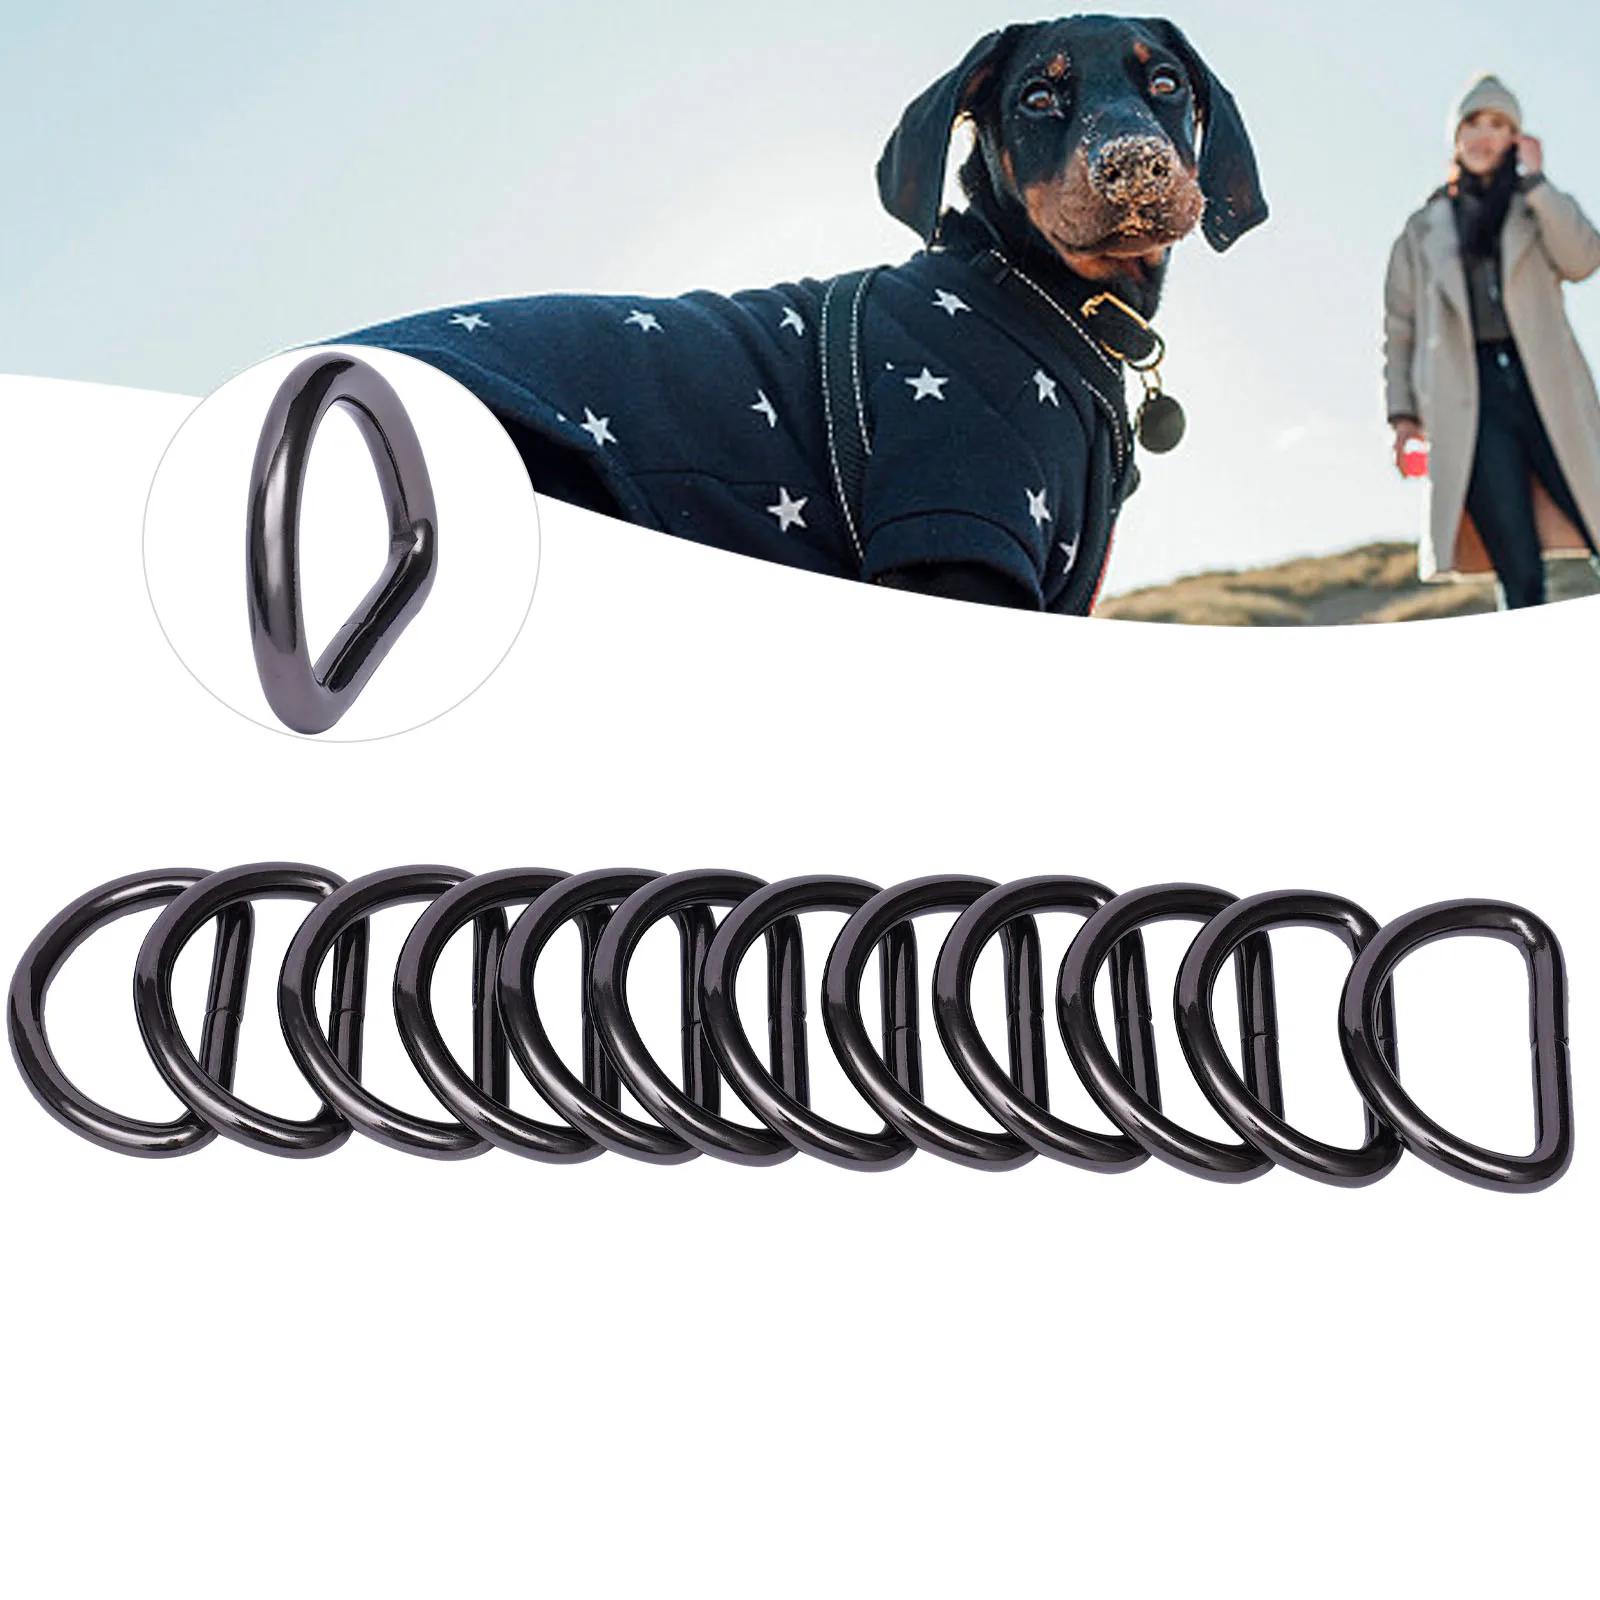 

Extra Welded Strong D Shape Rings Metal Heavy Duty Inside Width 12 Pack for Dog Collars Harnesses Fabric Paracord Strap Webbing